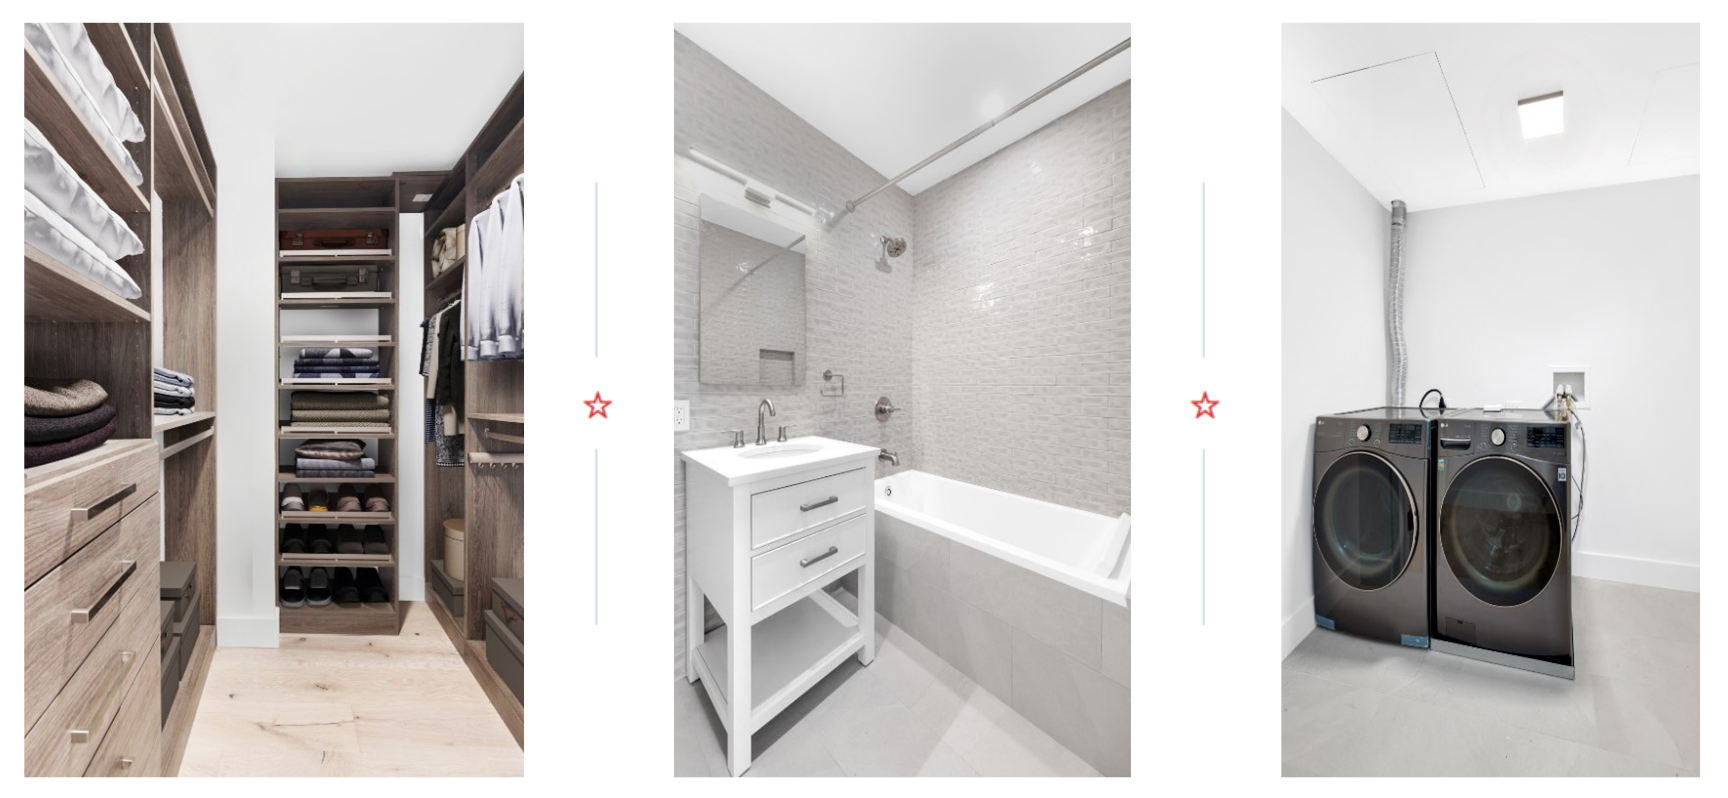 Three images of the project to include a laundry room, remodeled closet with organizer, and bathroom.